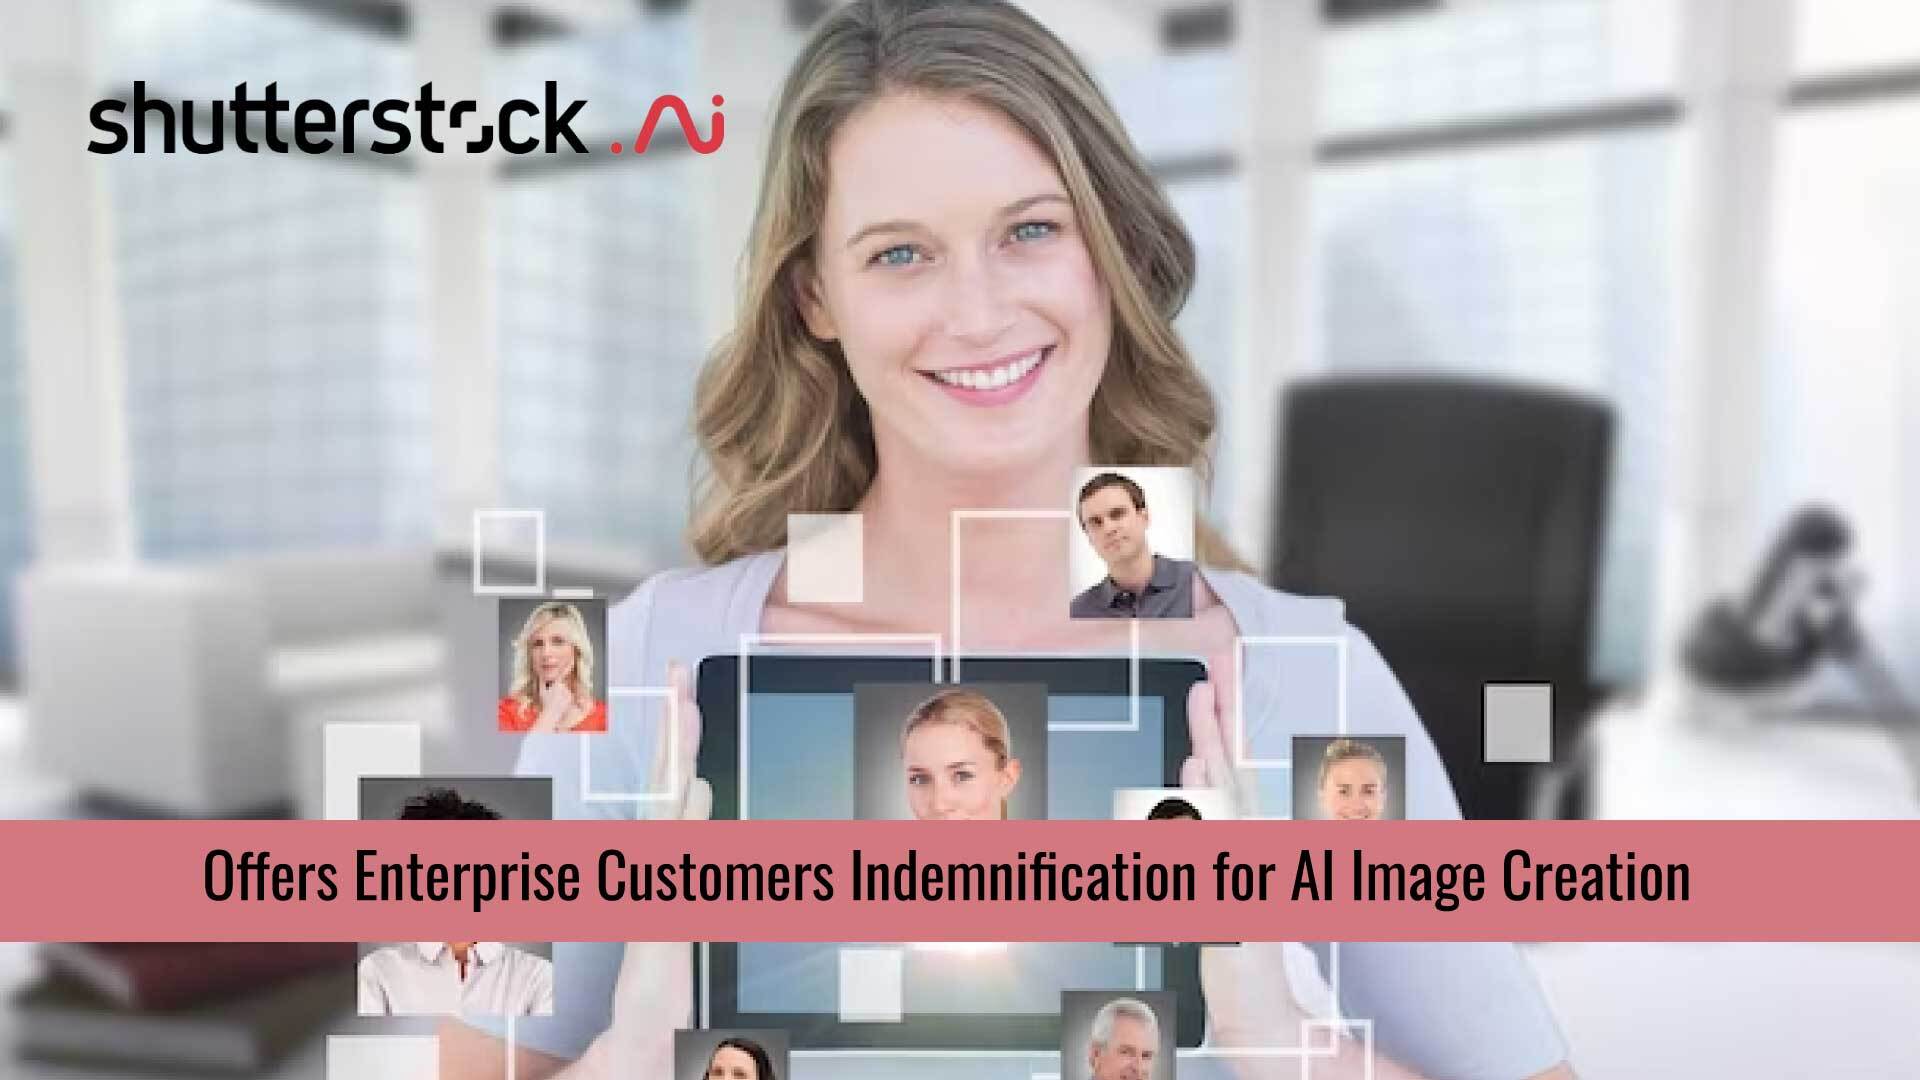 Shutterstock Offers Enterprise Customers Indemnification for AI Image Creation